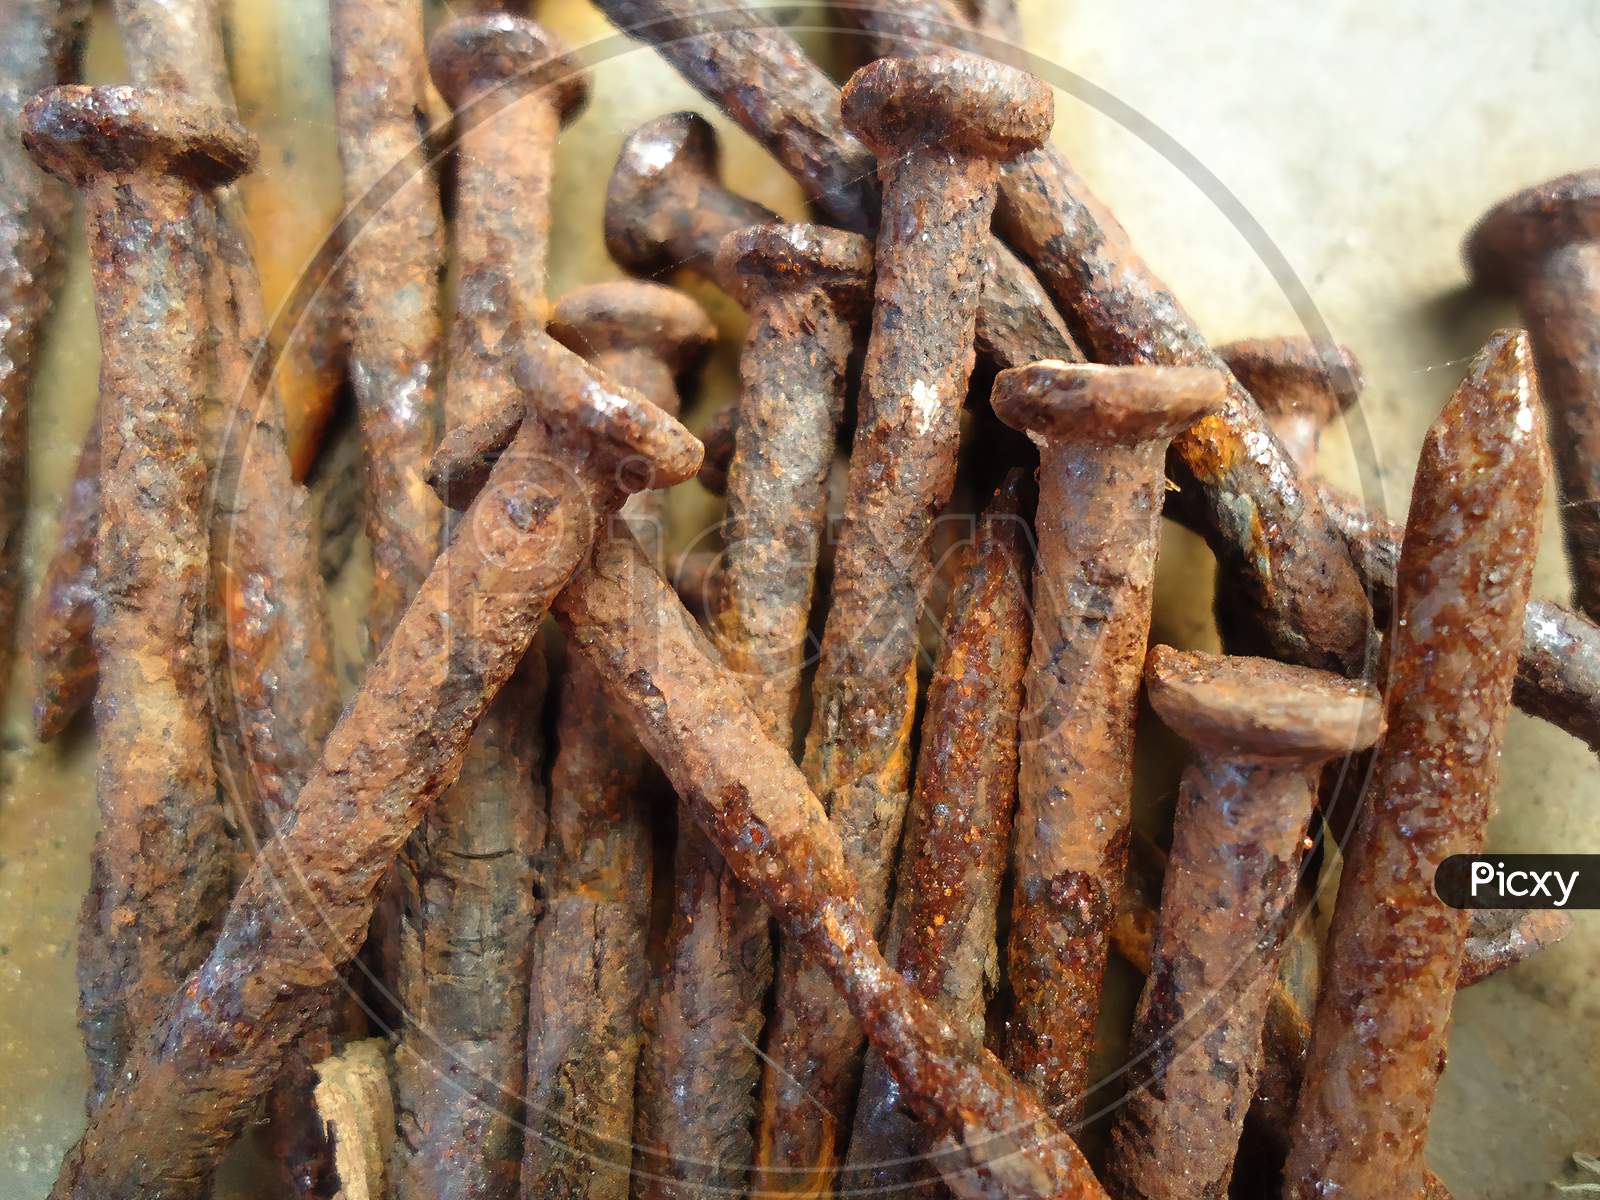 Many rusted nail, Group of Iron rust, Metal surface becomes brown from deterioration